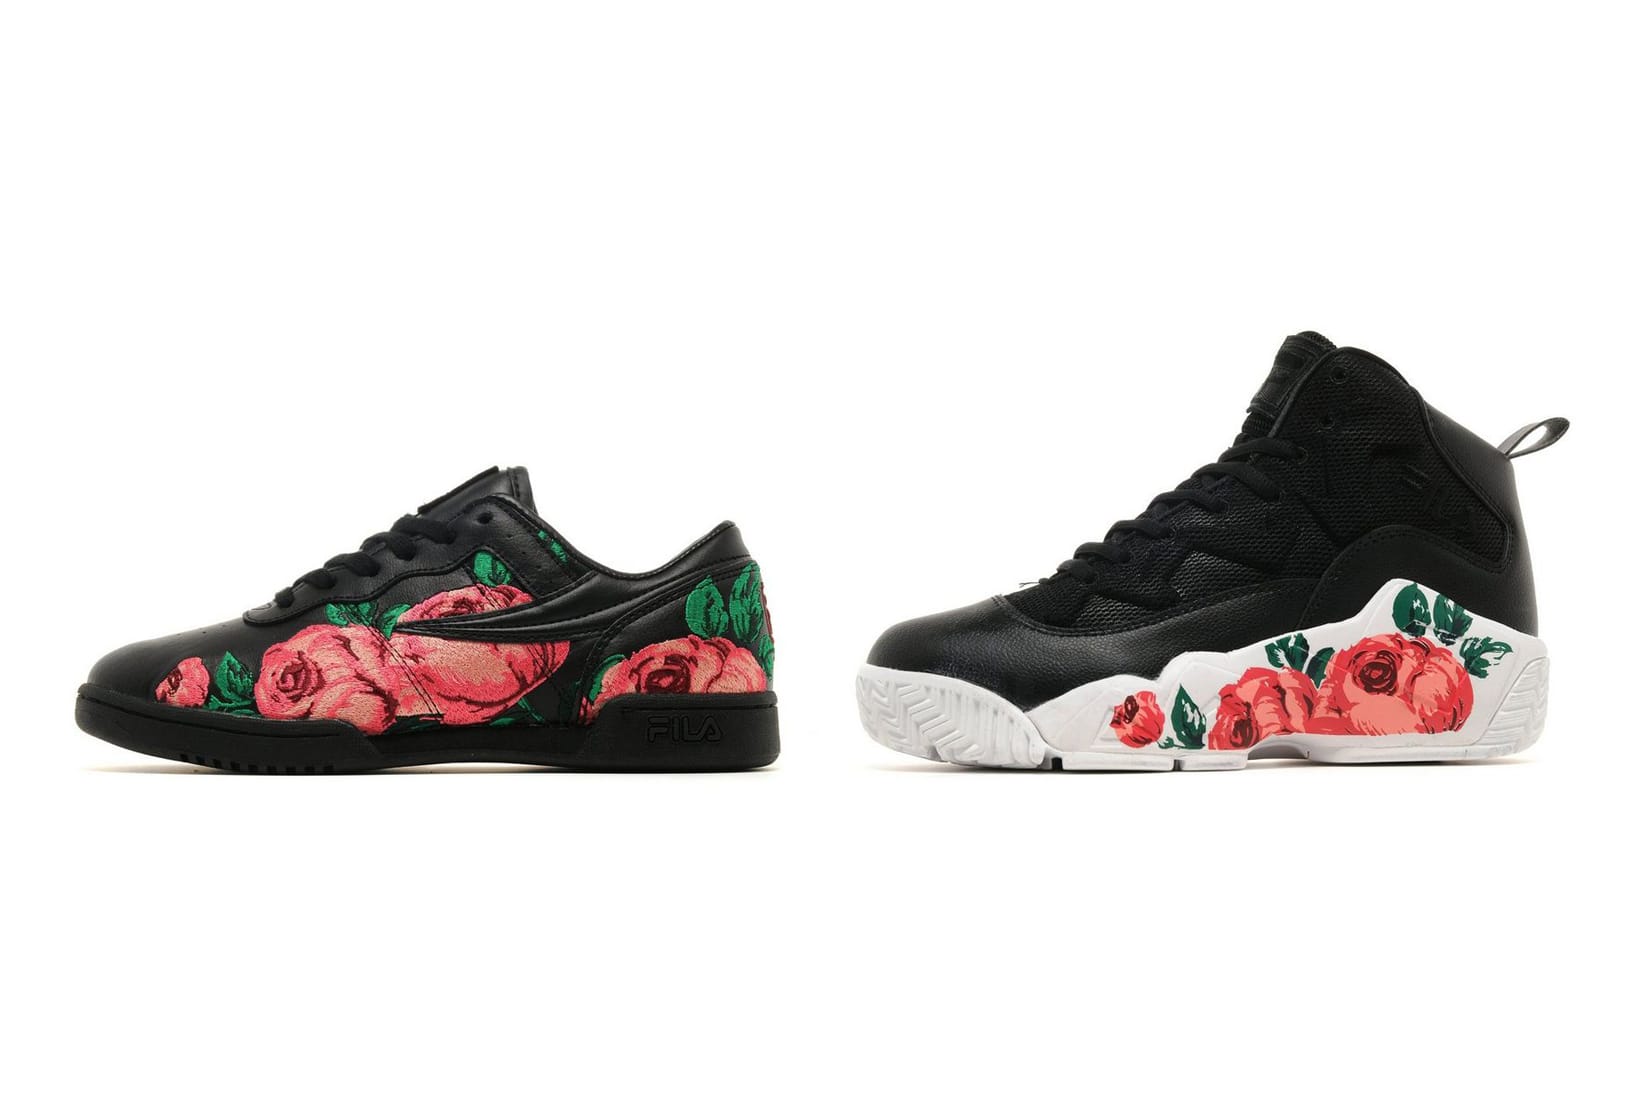 FILA Releases More Sneakers in 